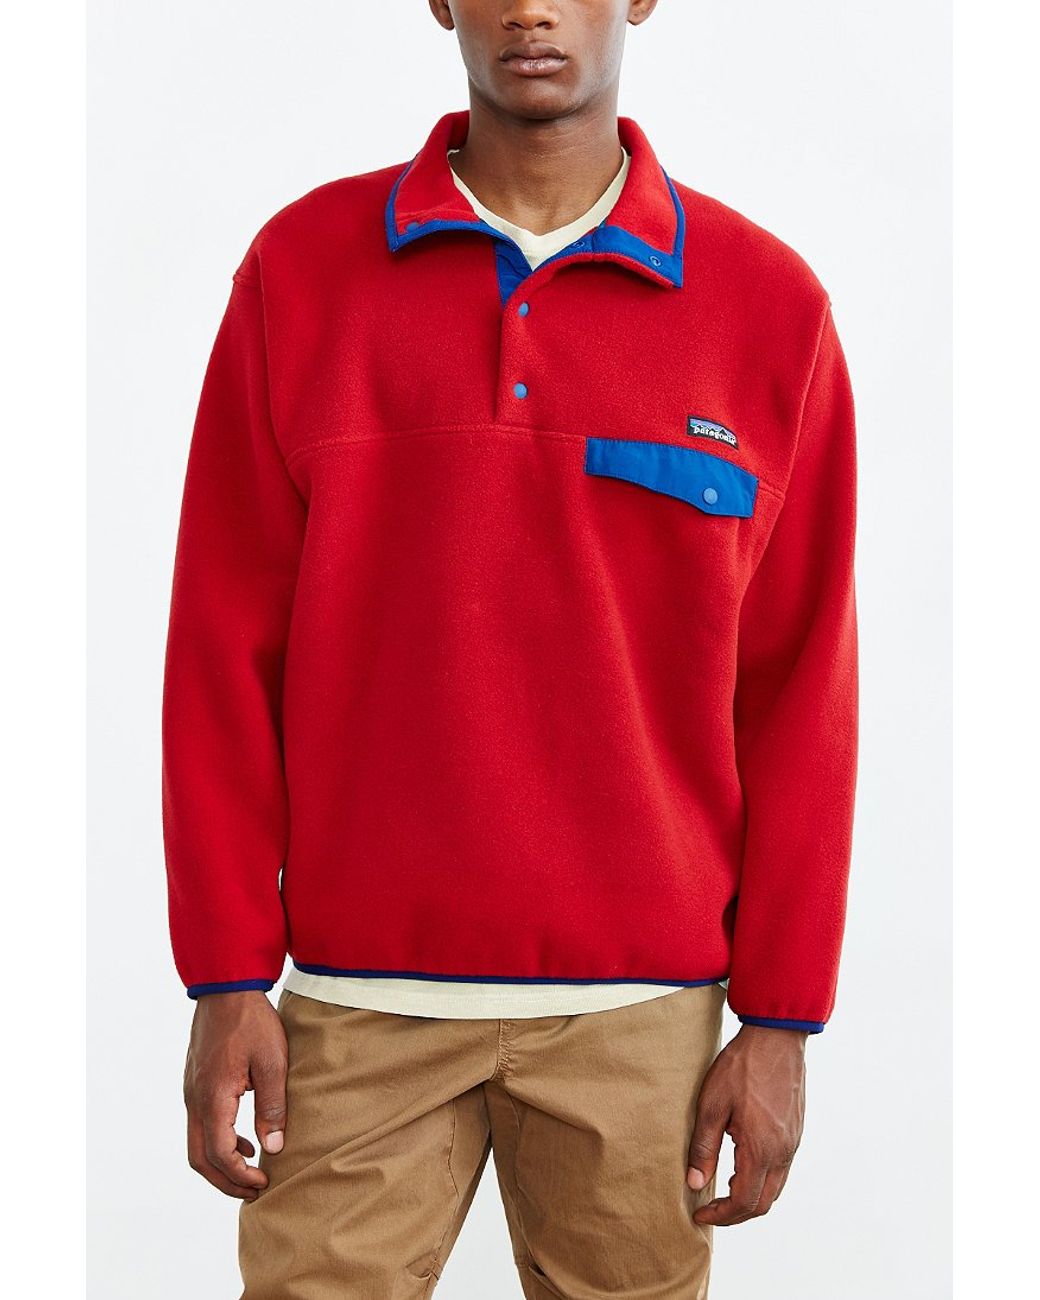 Patagonia Synchilla Snap-t Fleece Pullover Jacket in Red | Lyst